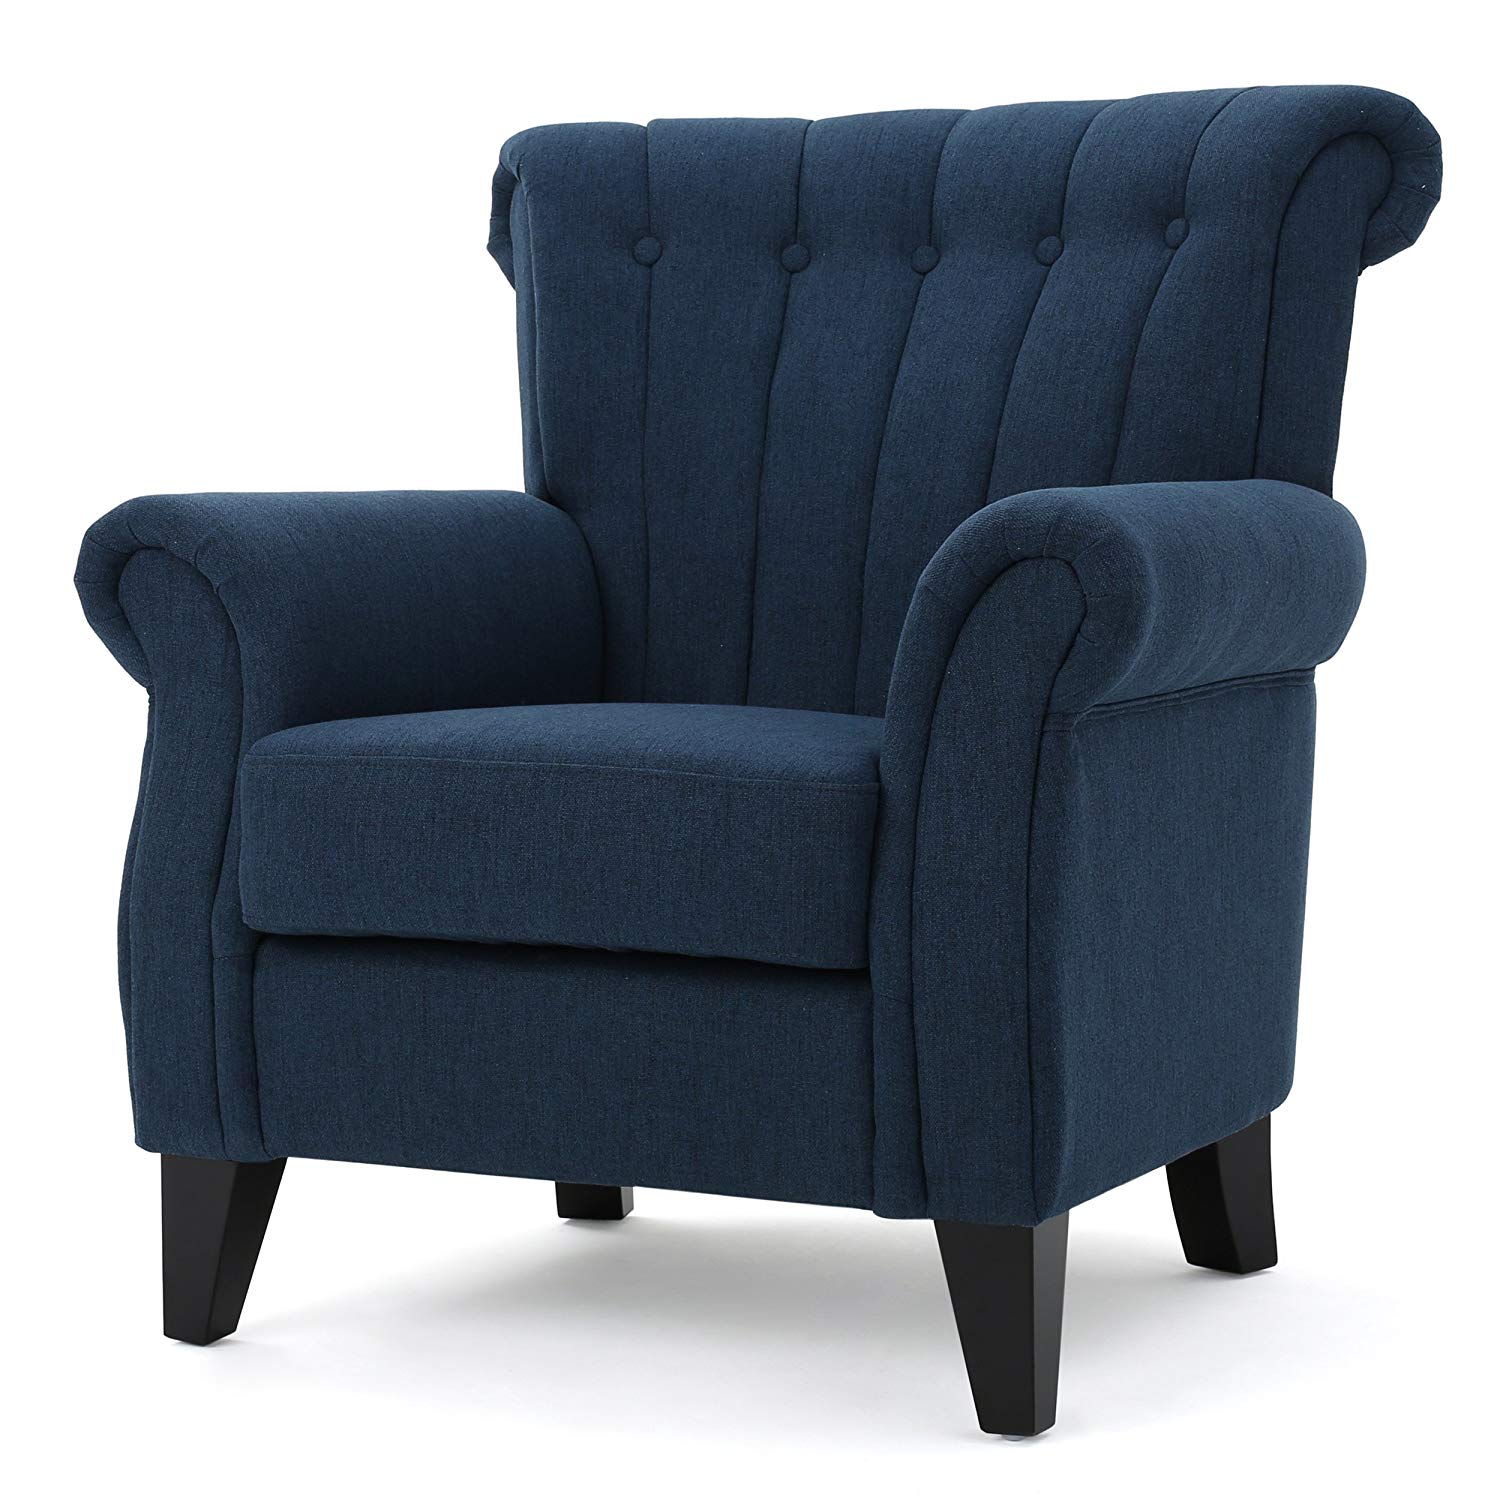 Romee Channel-Tufted Fabric Club Chair